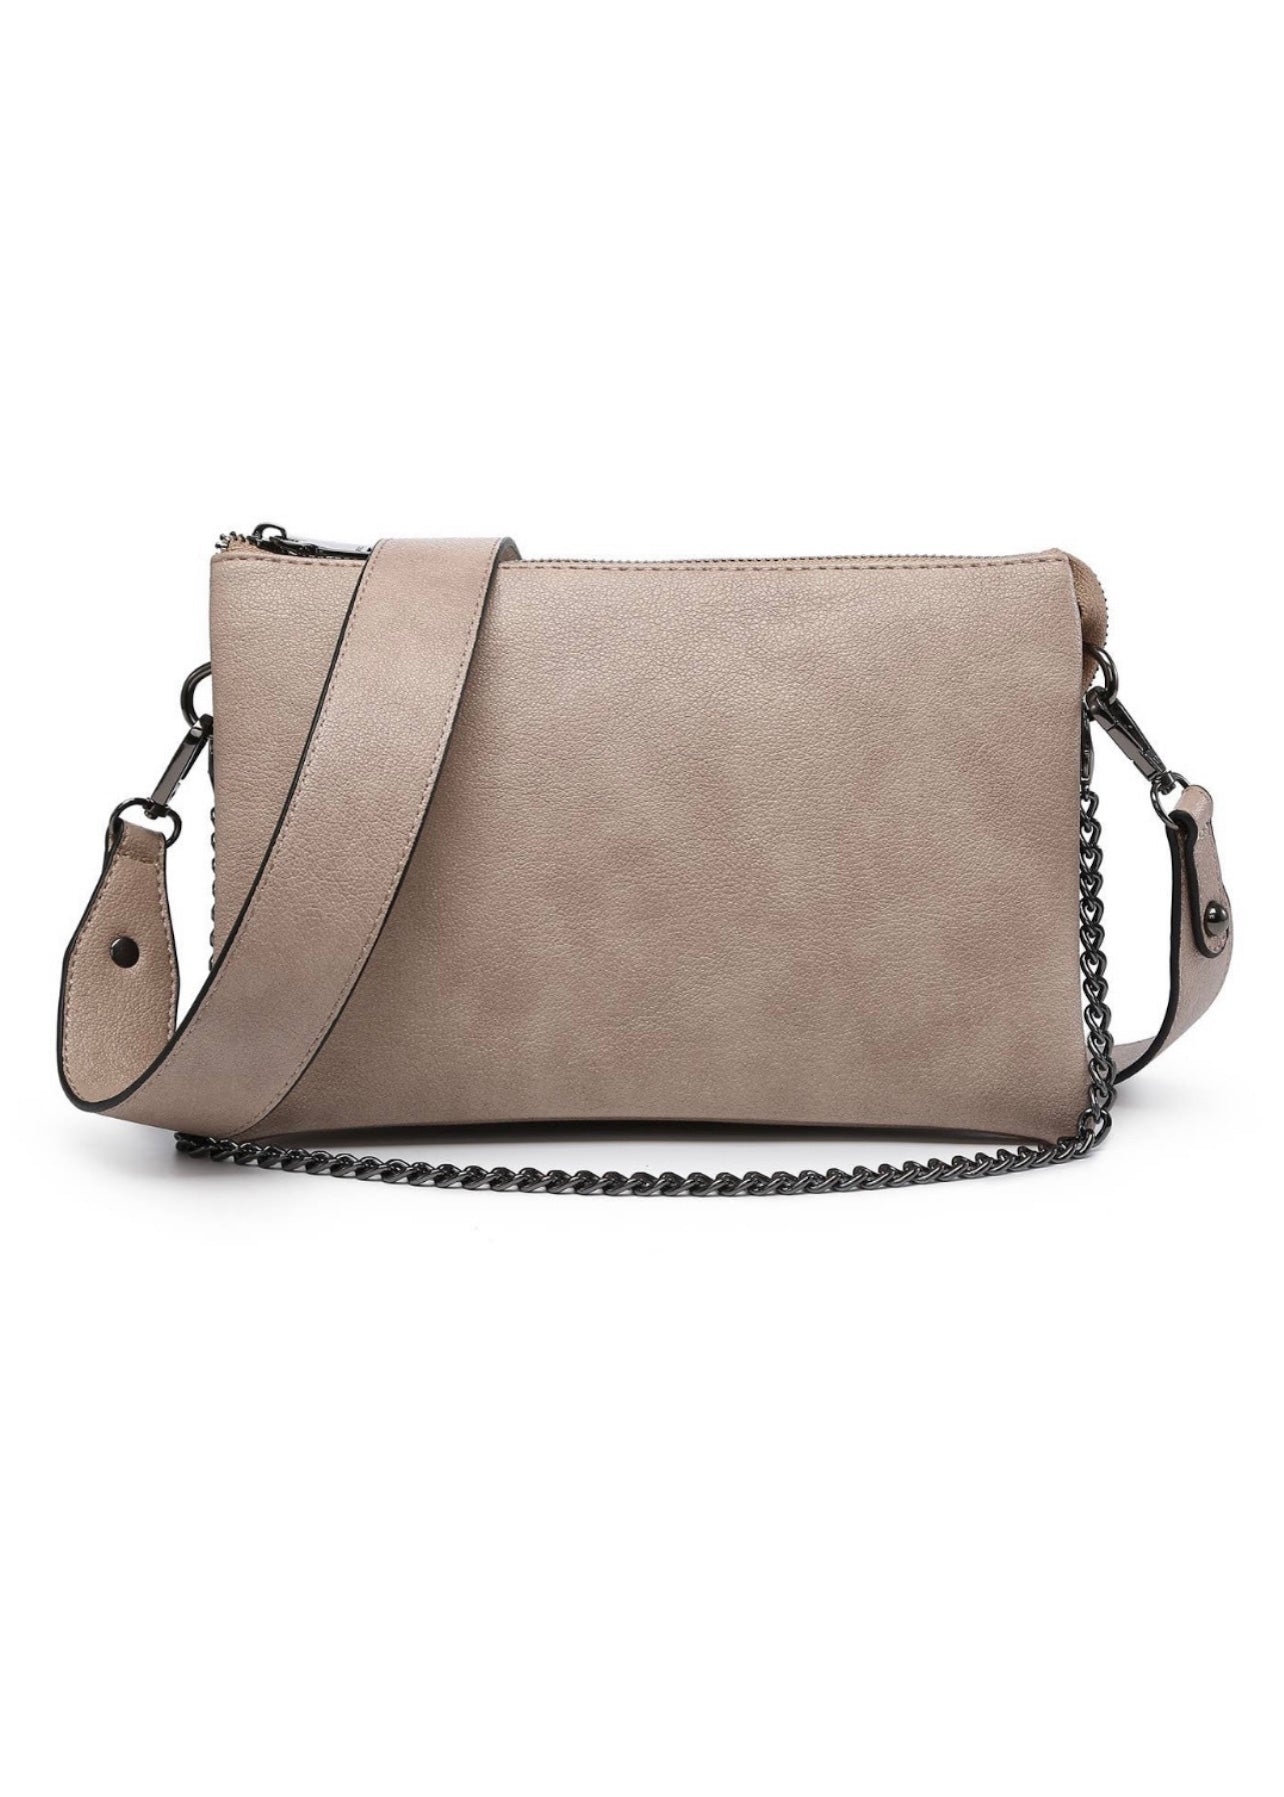 Camel vegan leather crossbody purse with  2 removable straps. One strap is gun metal chain and the other is a vegan leather crossbody. Purse is 10 x 7 x 2 and had 3 compartments inside. 